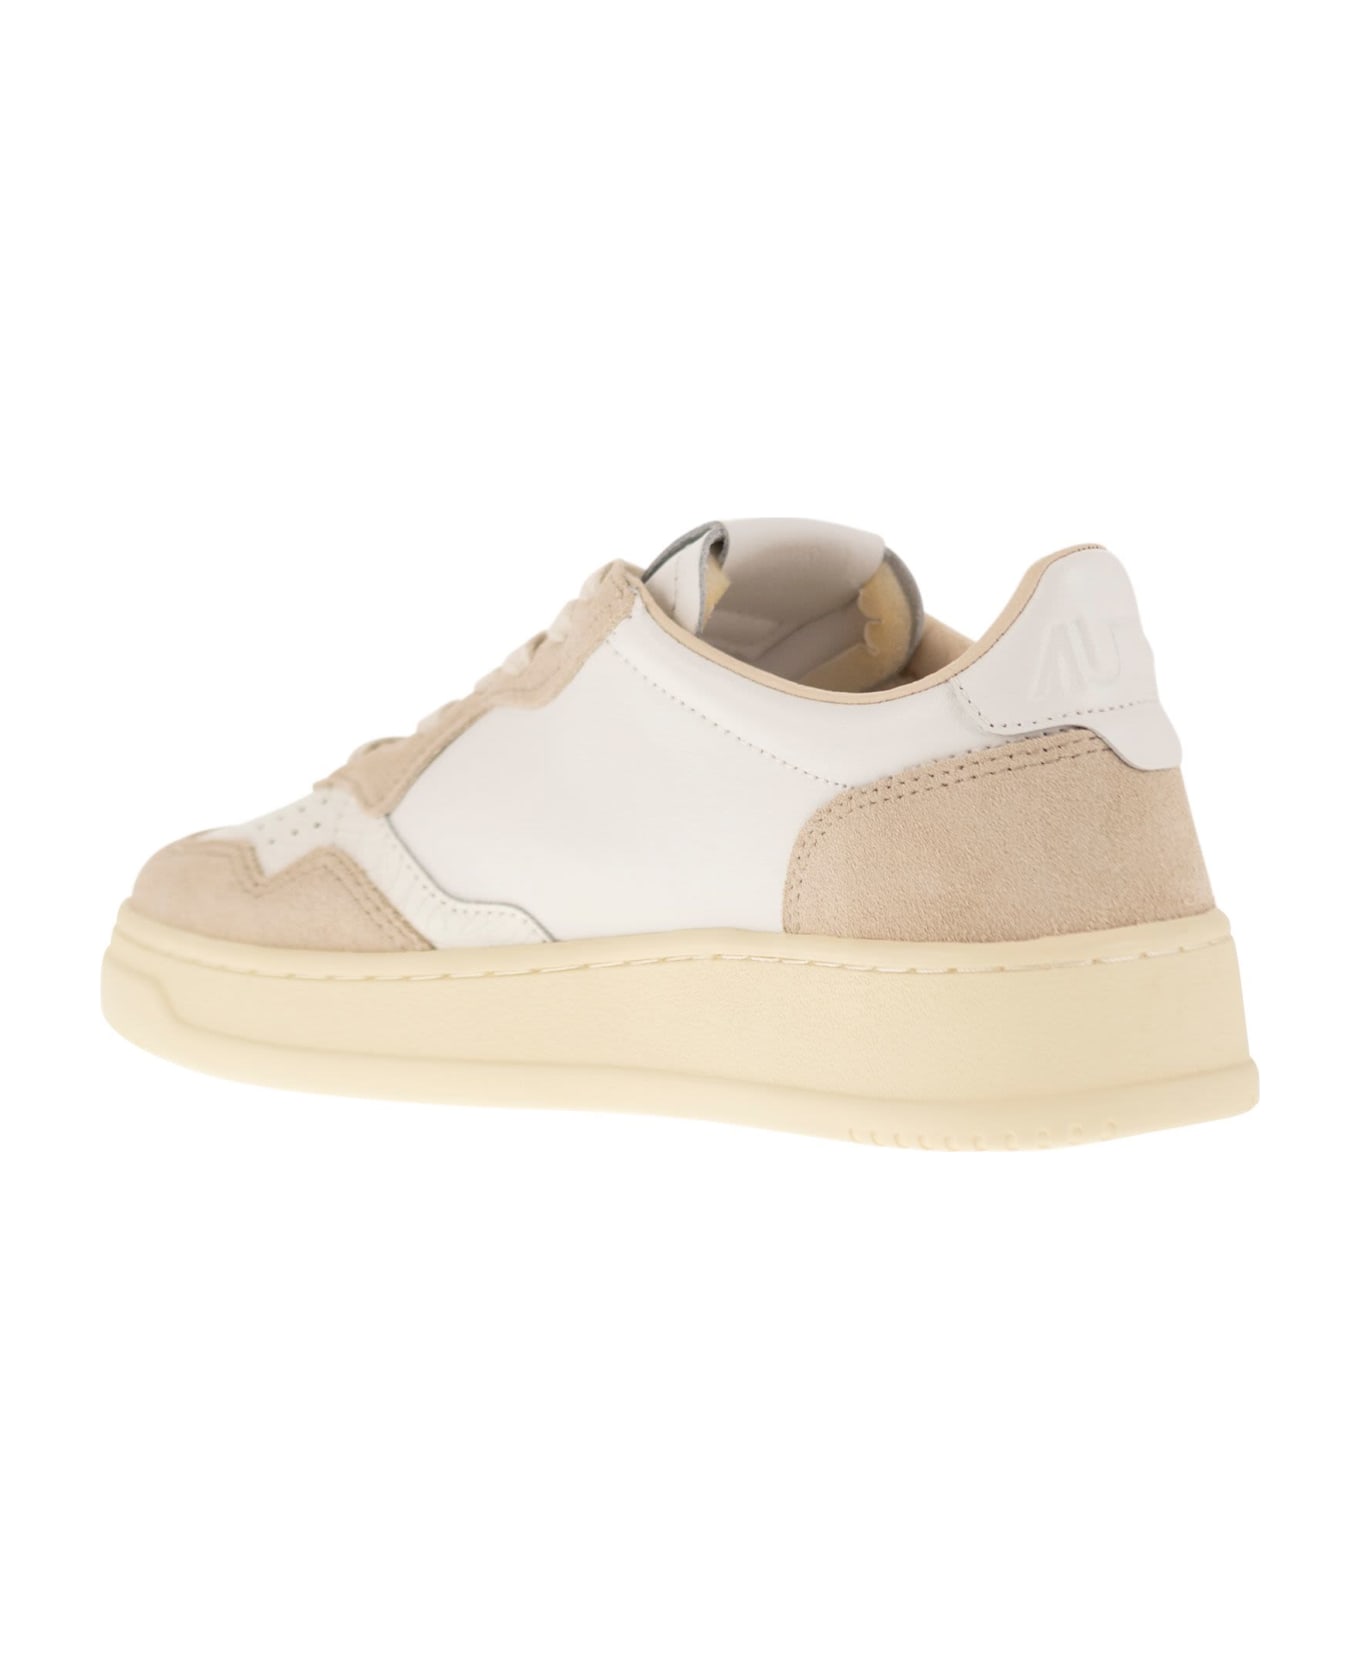 Autry Medalist Low - Leather Trainers - White/sand スニーカー